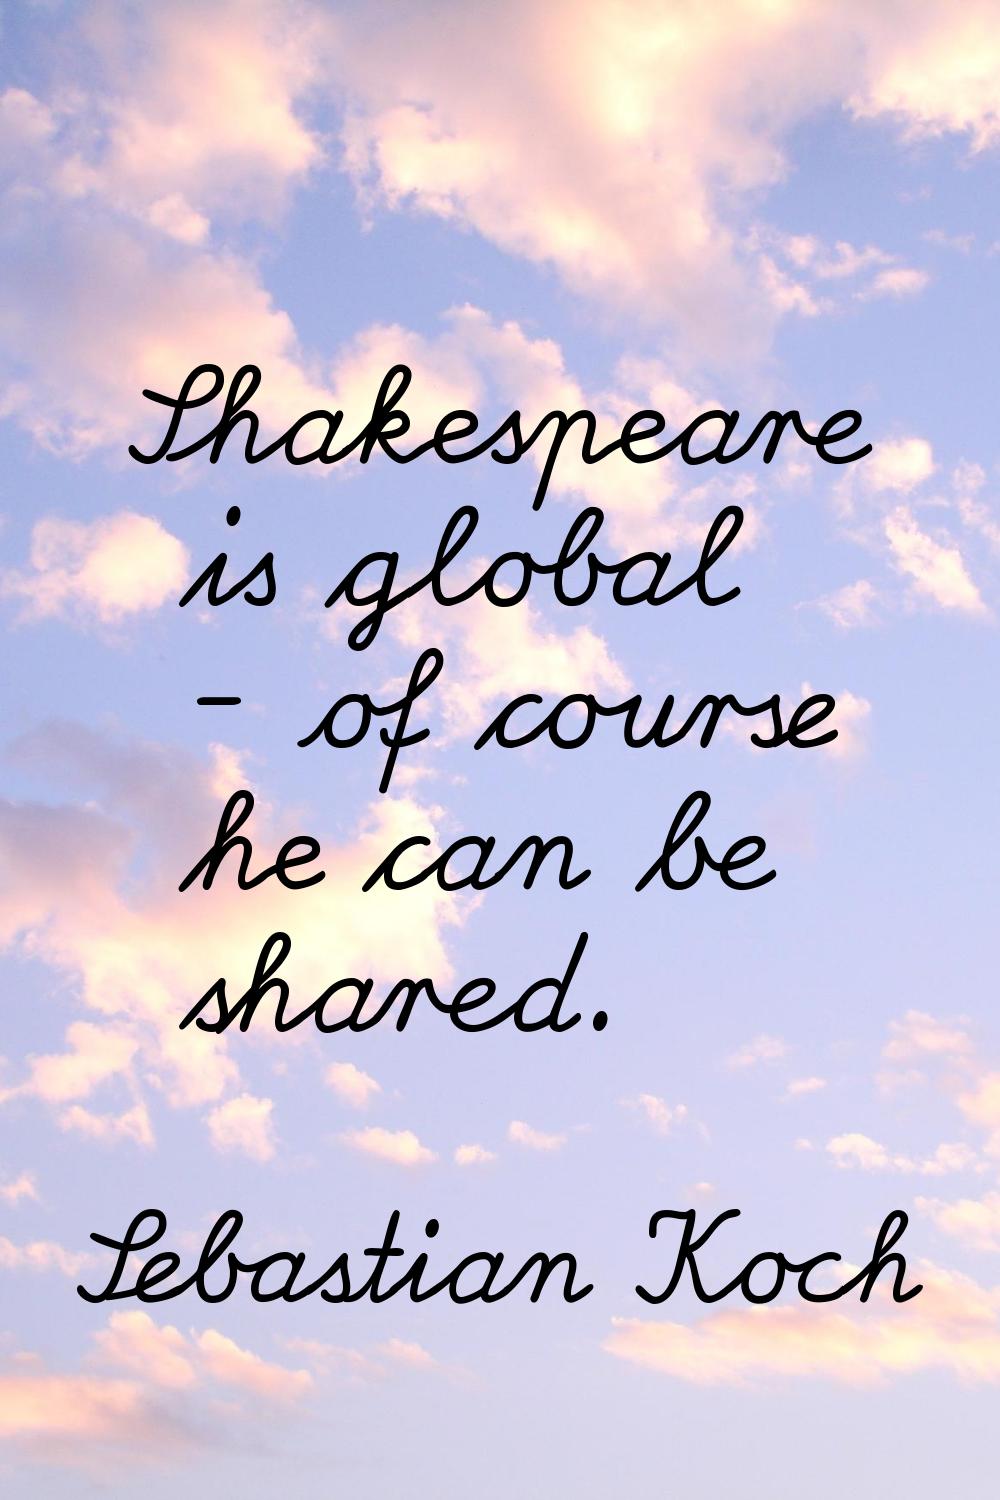 Shakespeare is global - of course he can be shared.